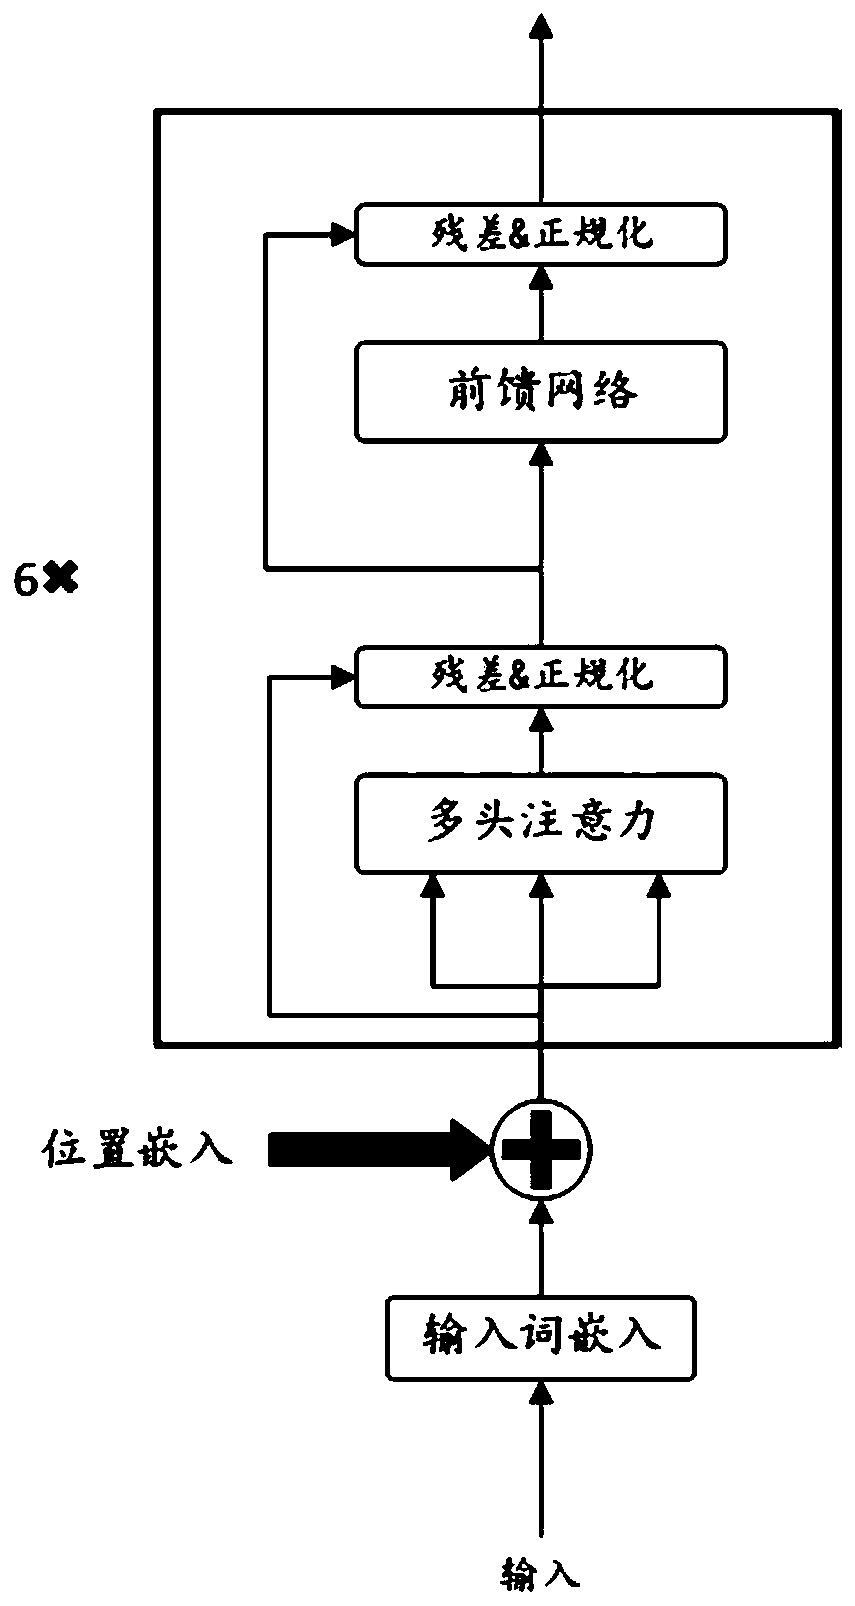 Chinese text key information extraction method based on pre-trained language model